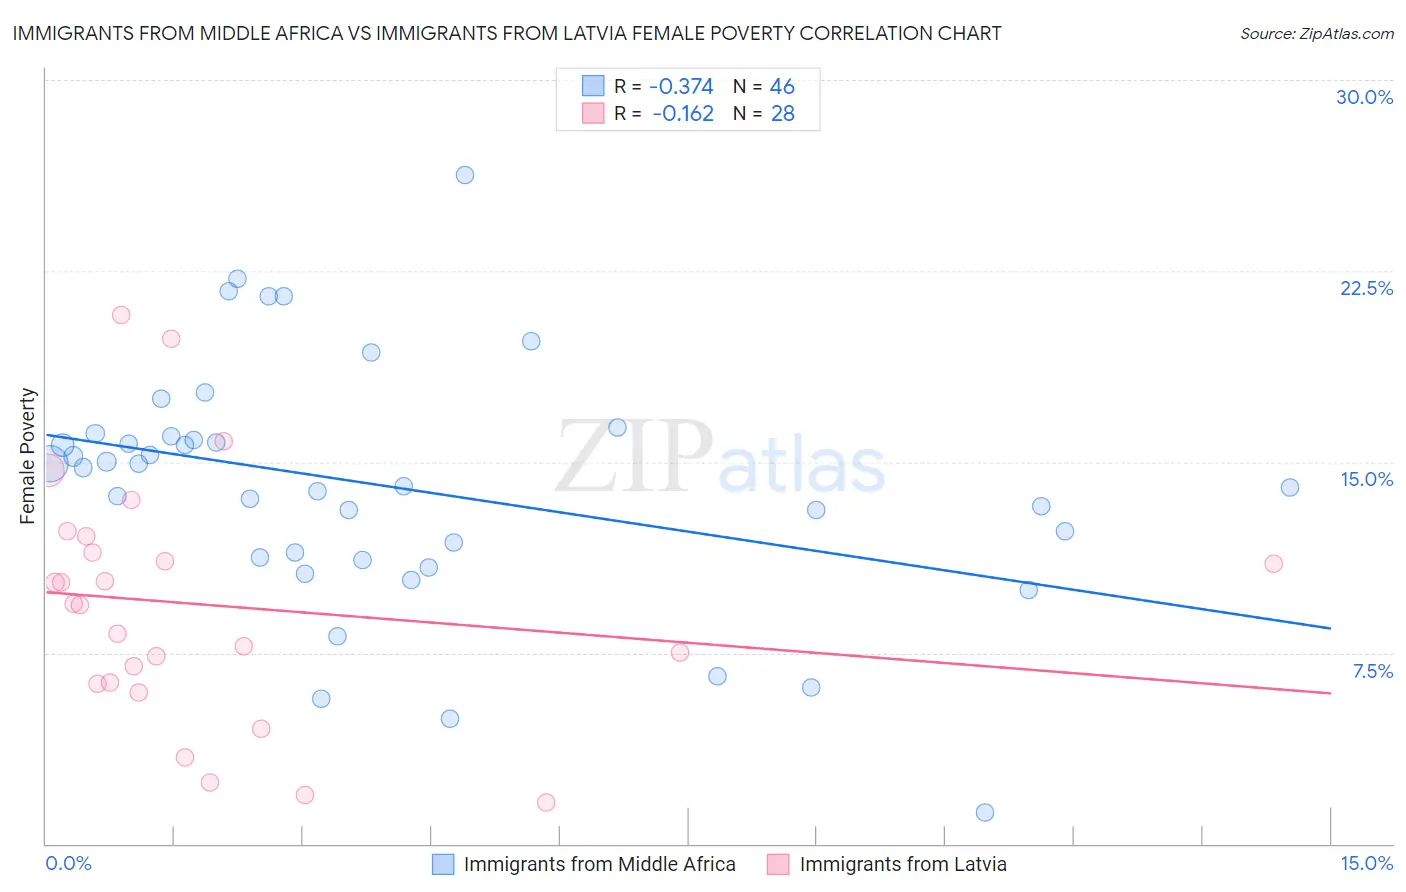 Immigrants from Middle Africa vs Immigrants from Latvia Female Poverty